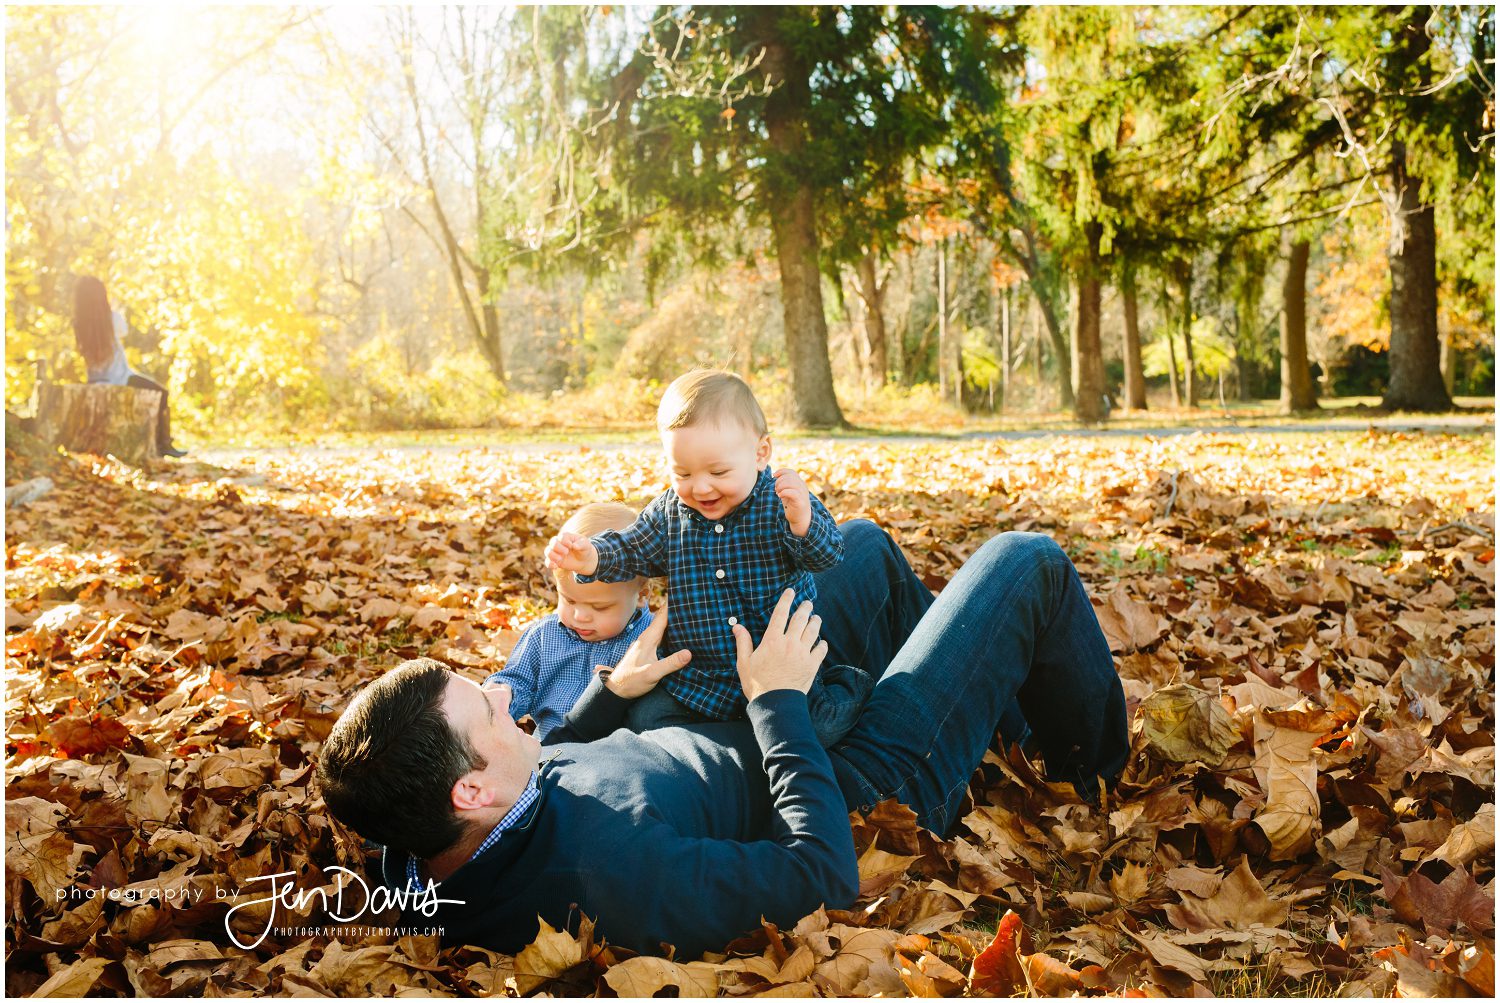 Fun with Daddy in the leaves